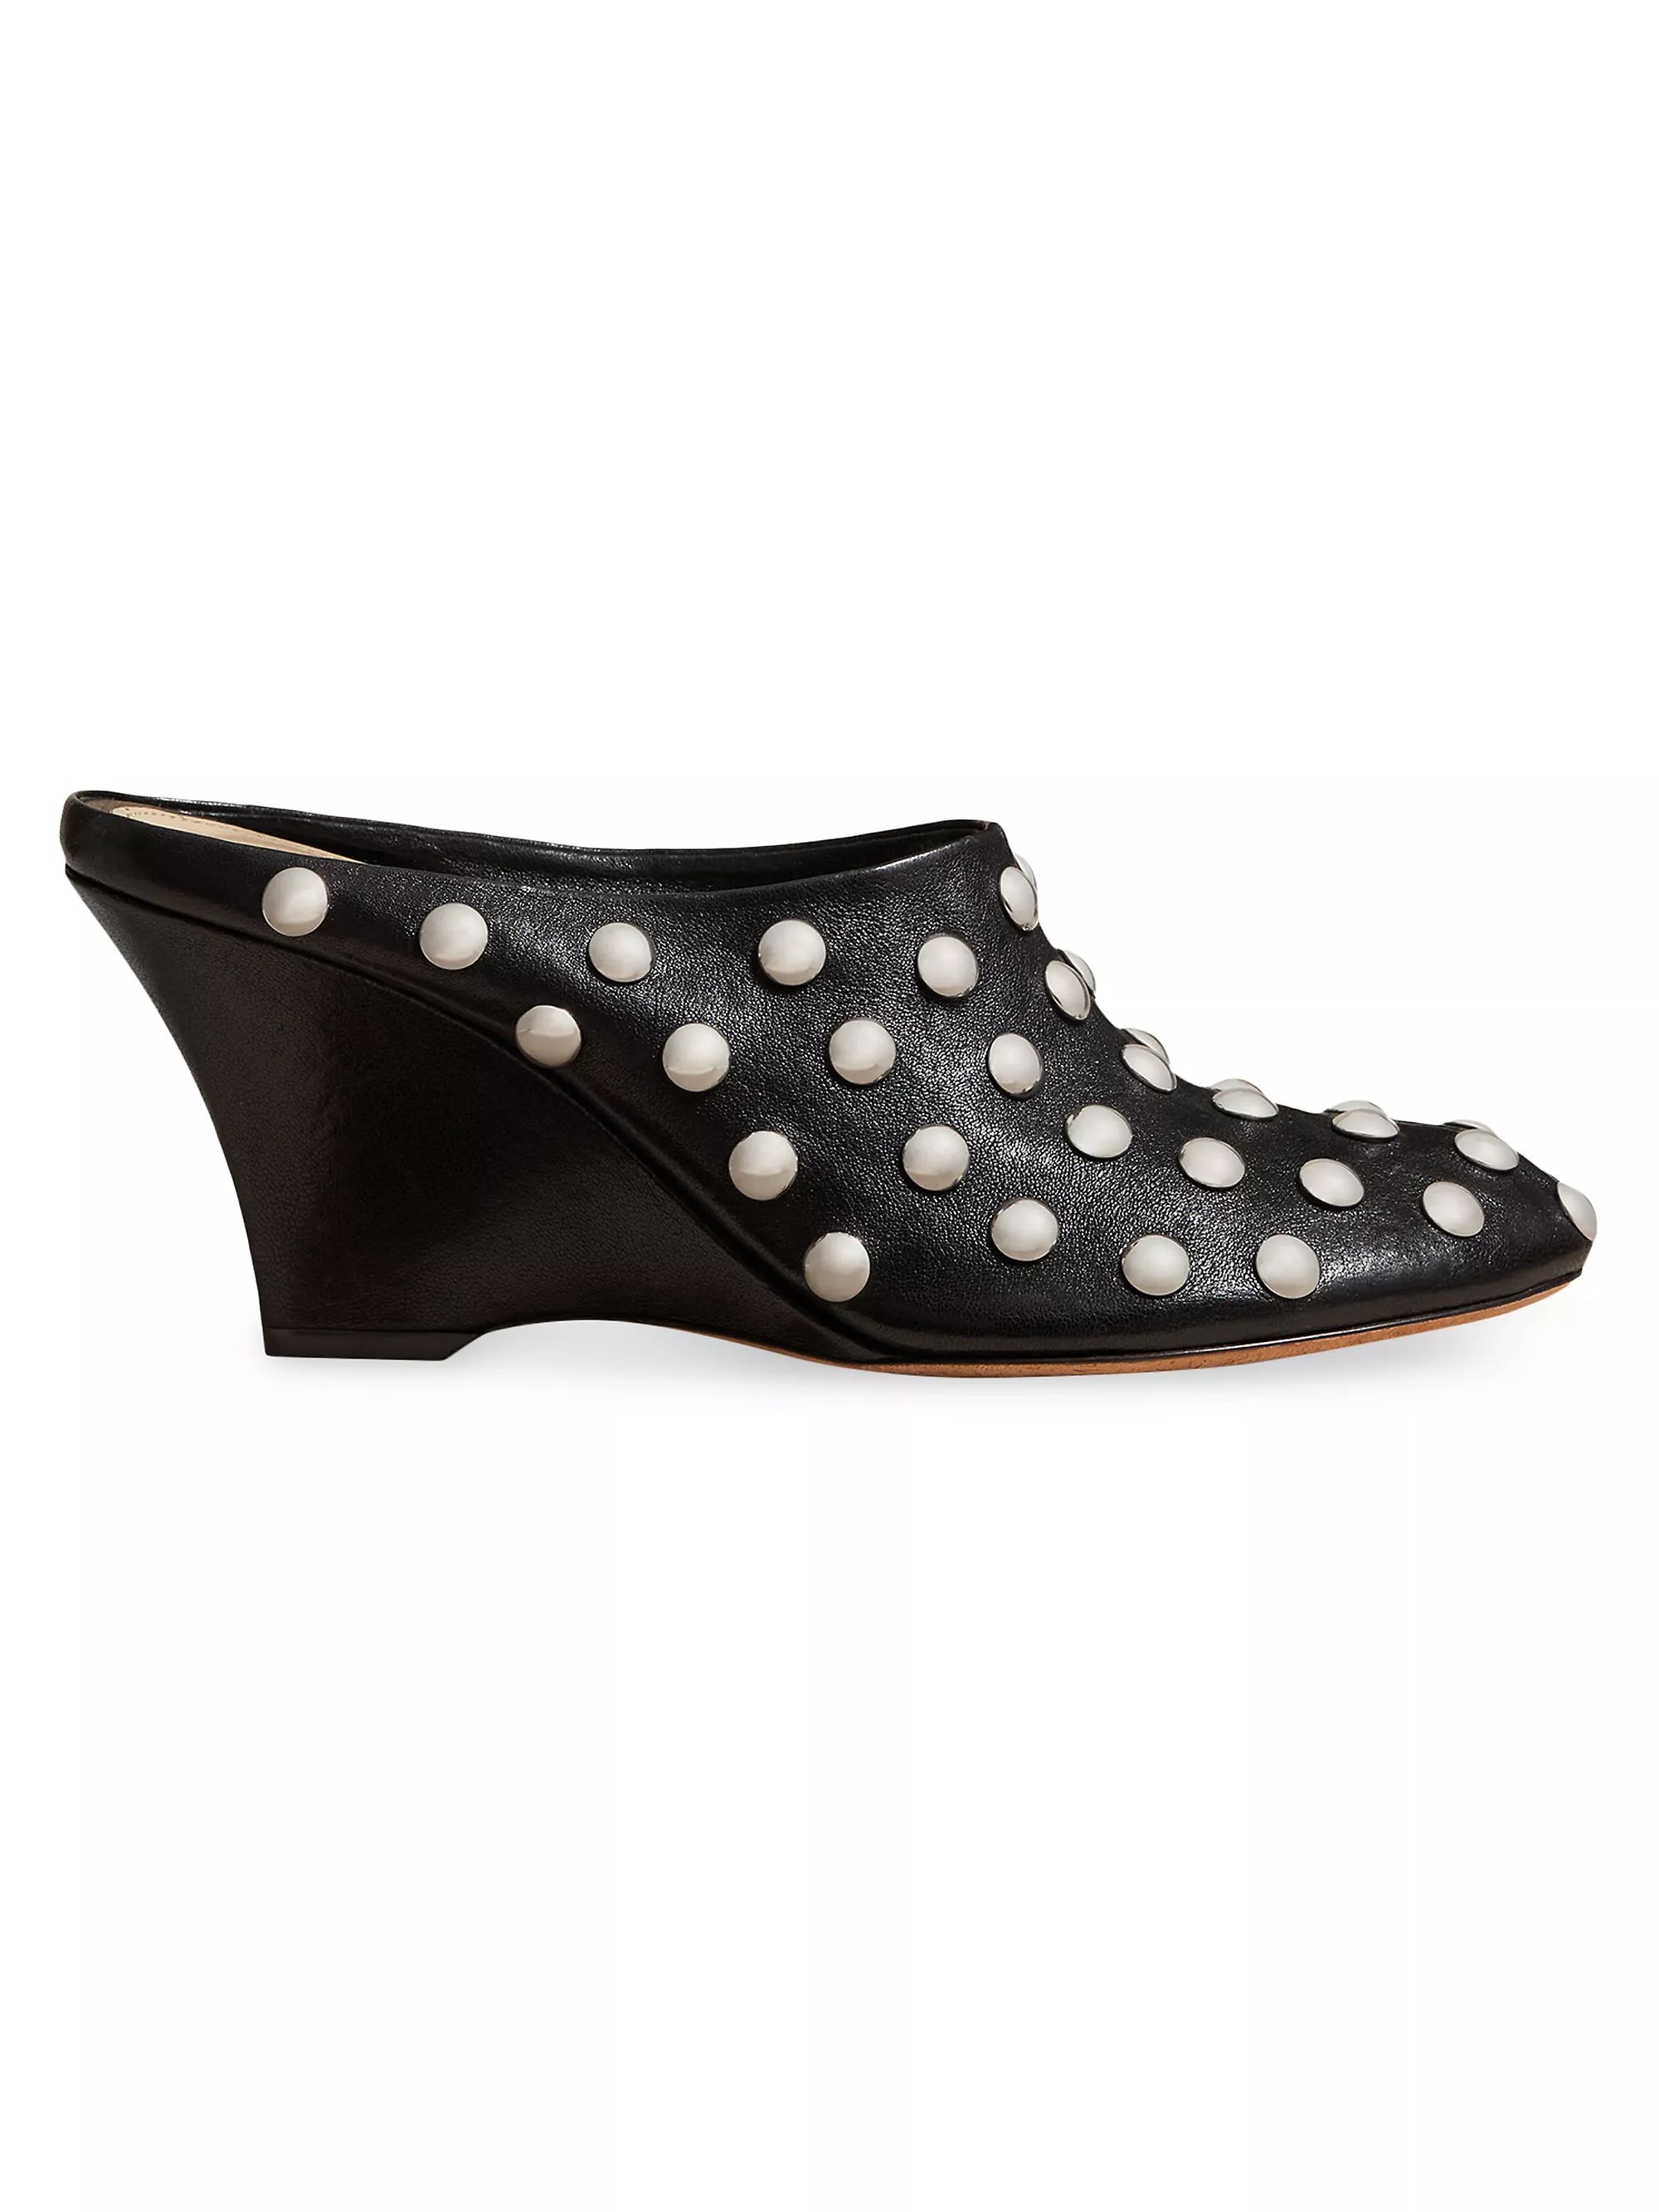 Apollo Leather Studded Wedge Mules | Saks Fifth Avenue